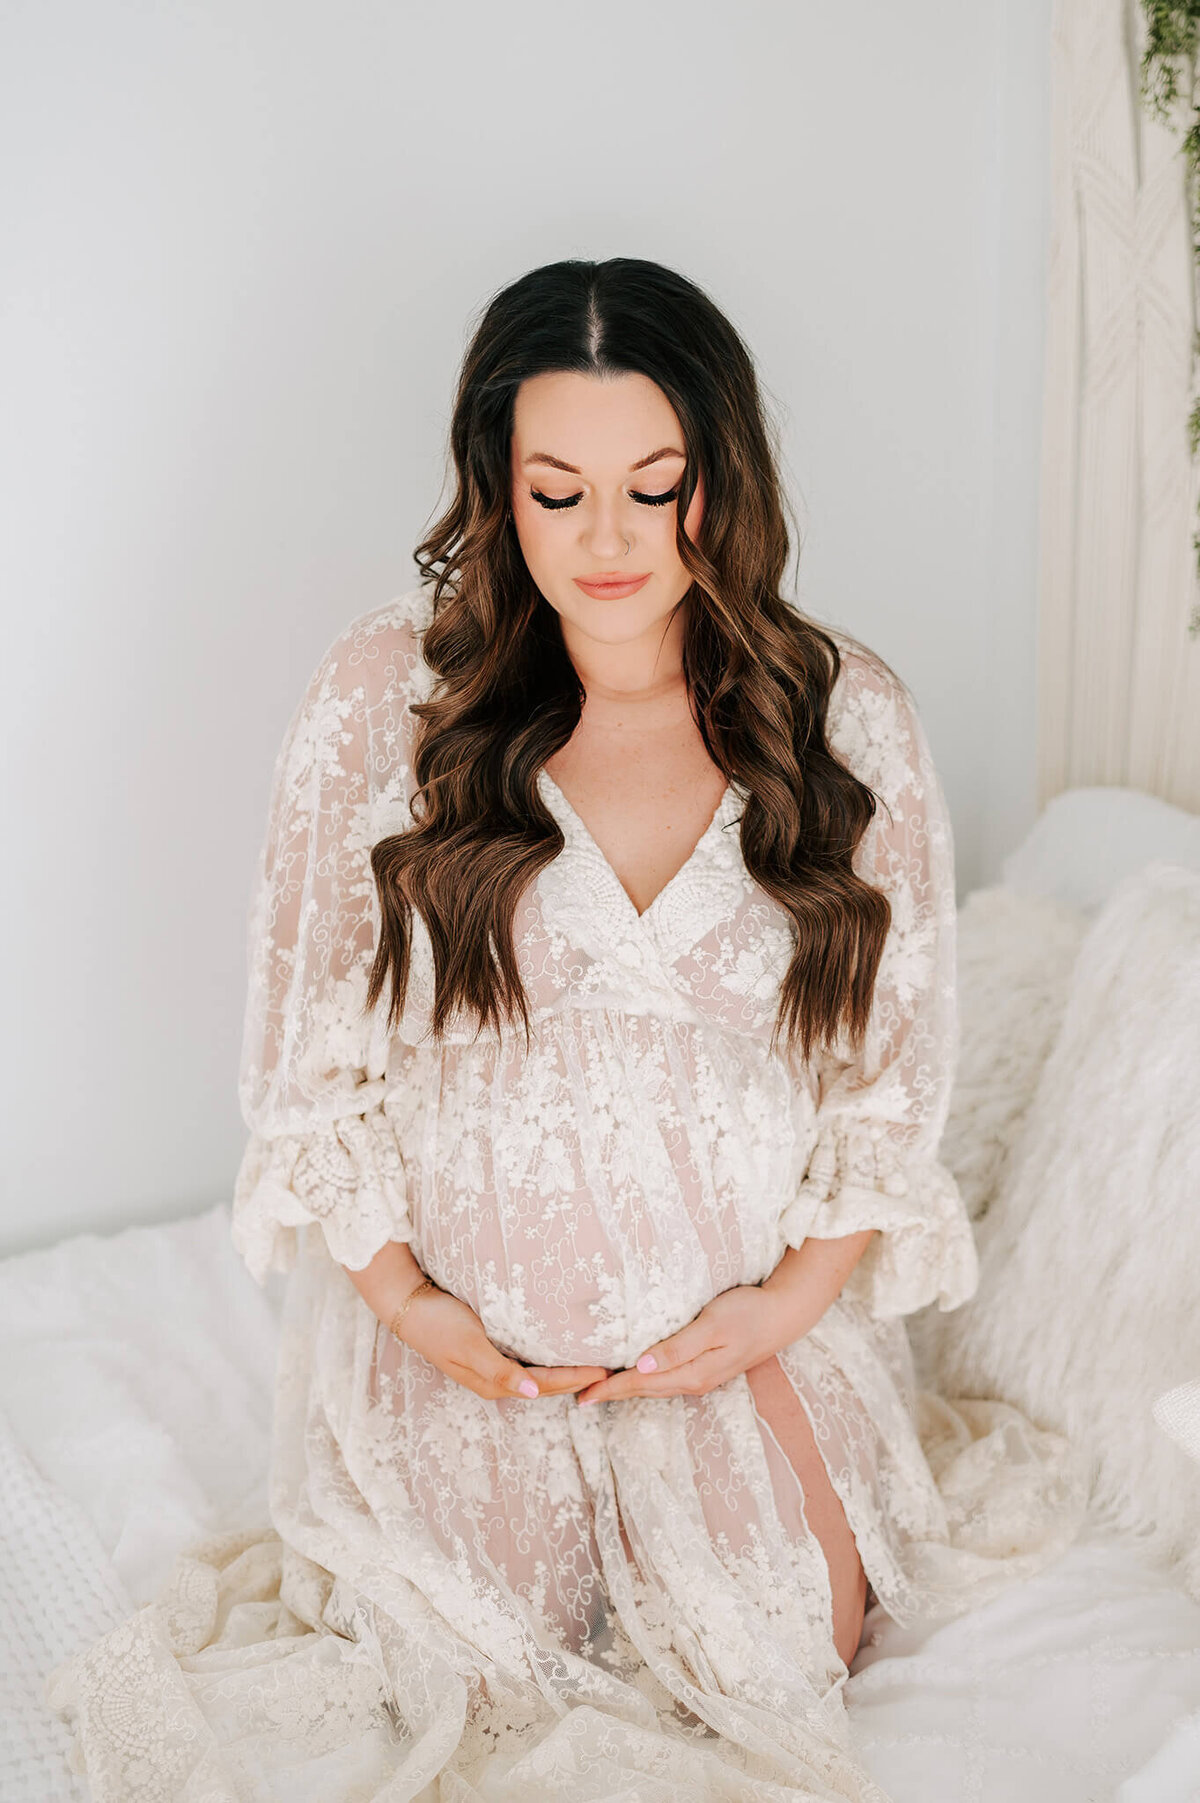 Springfield MO maternity photographer Jessica Kennedy of The XO Photography captures pregnant mom kneeling on the bed looking at her baby bump